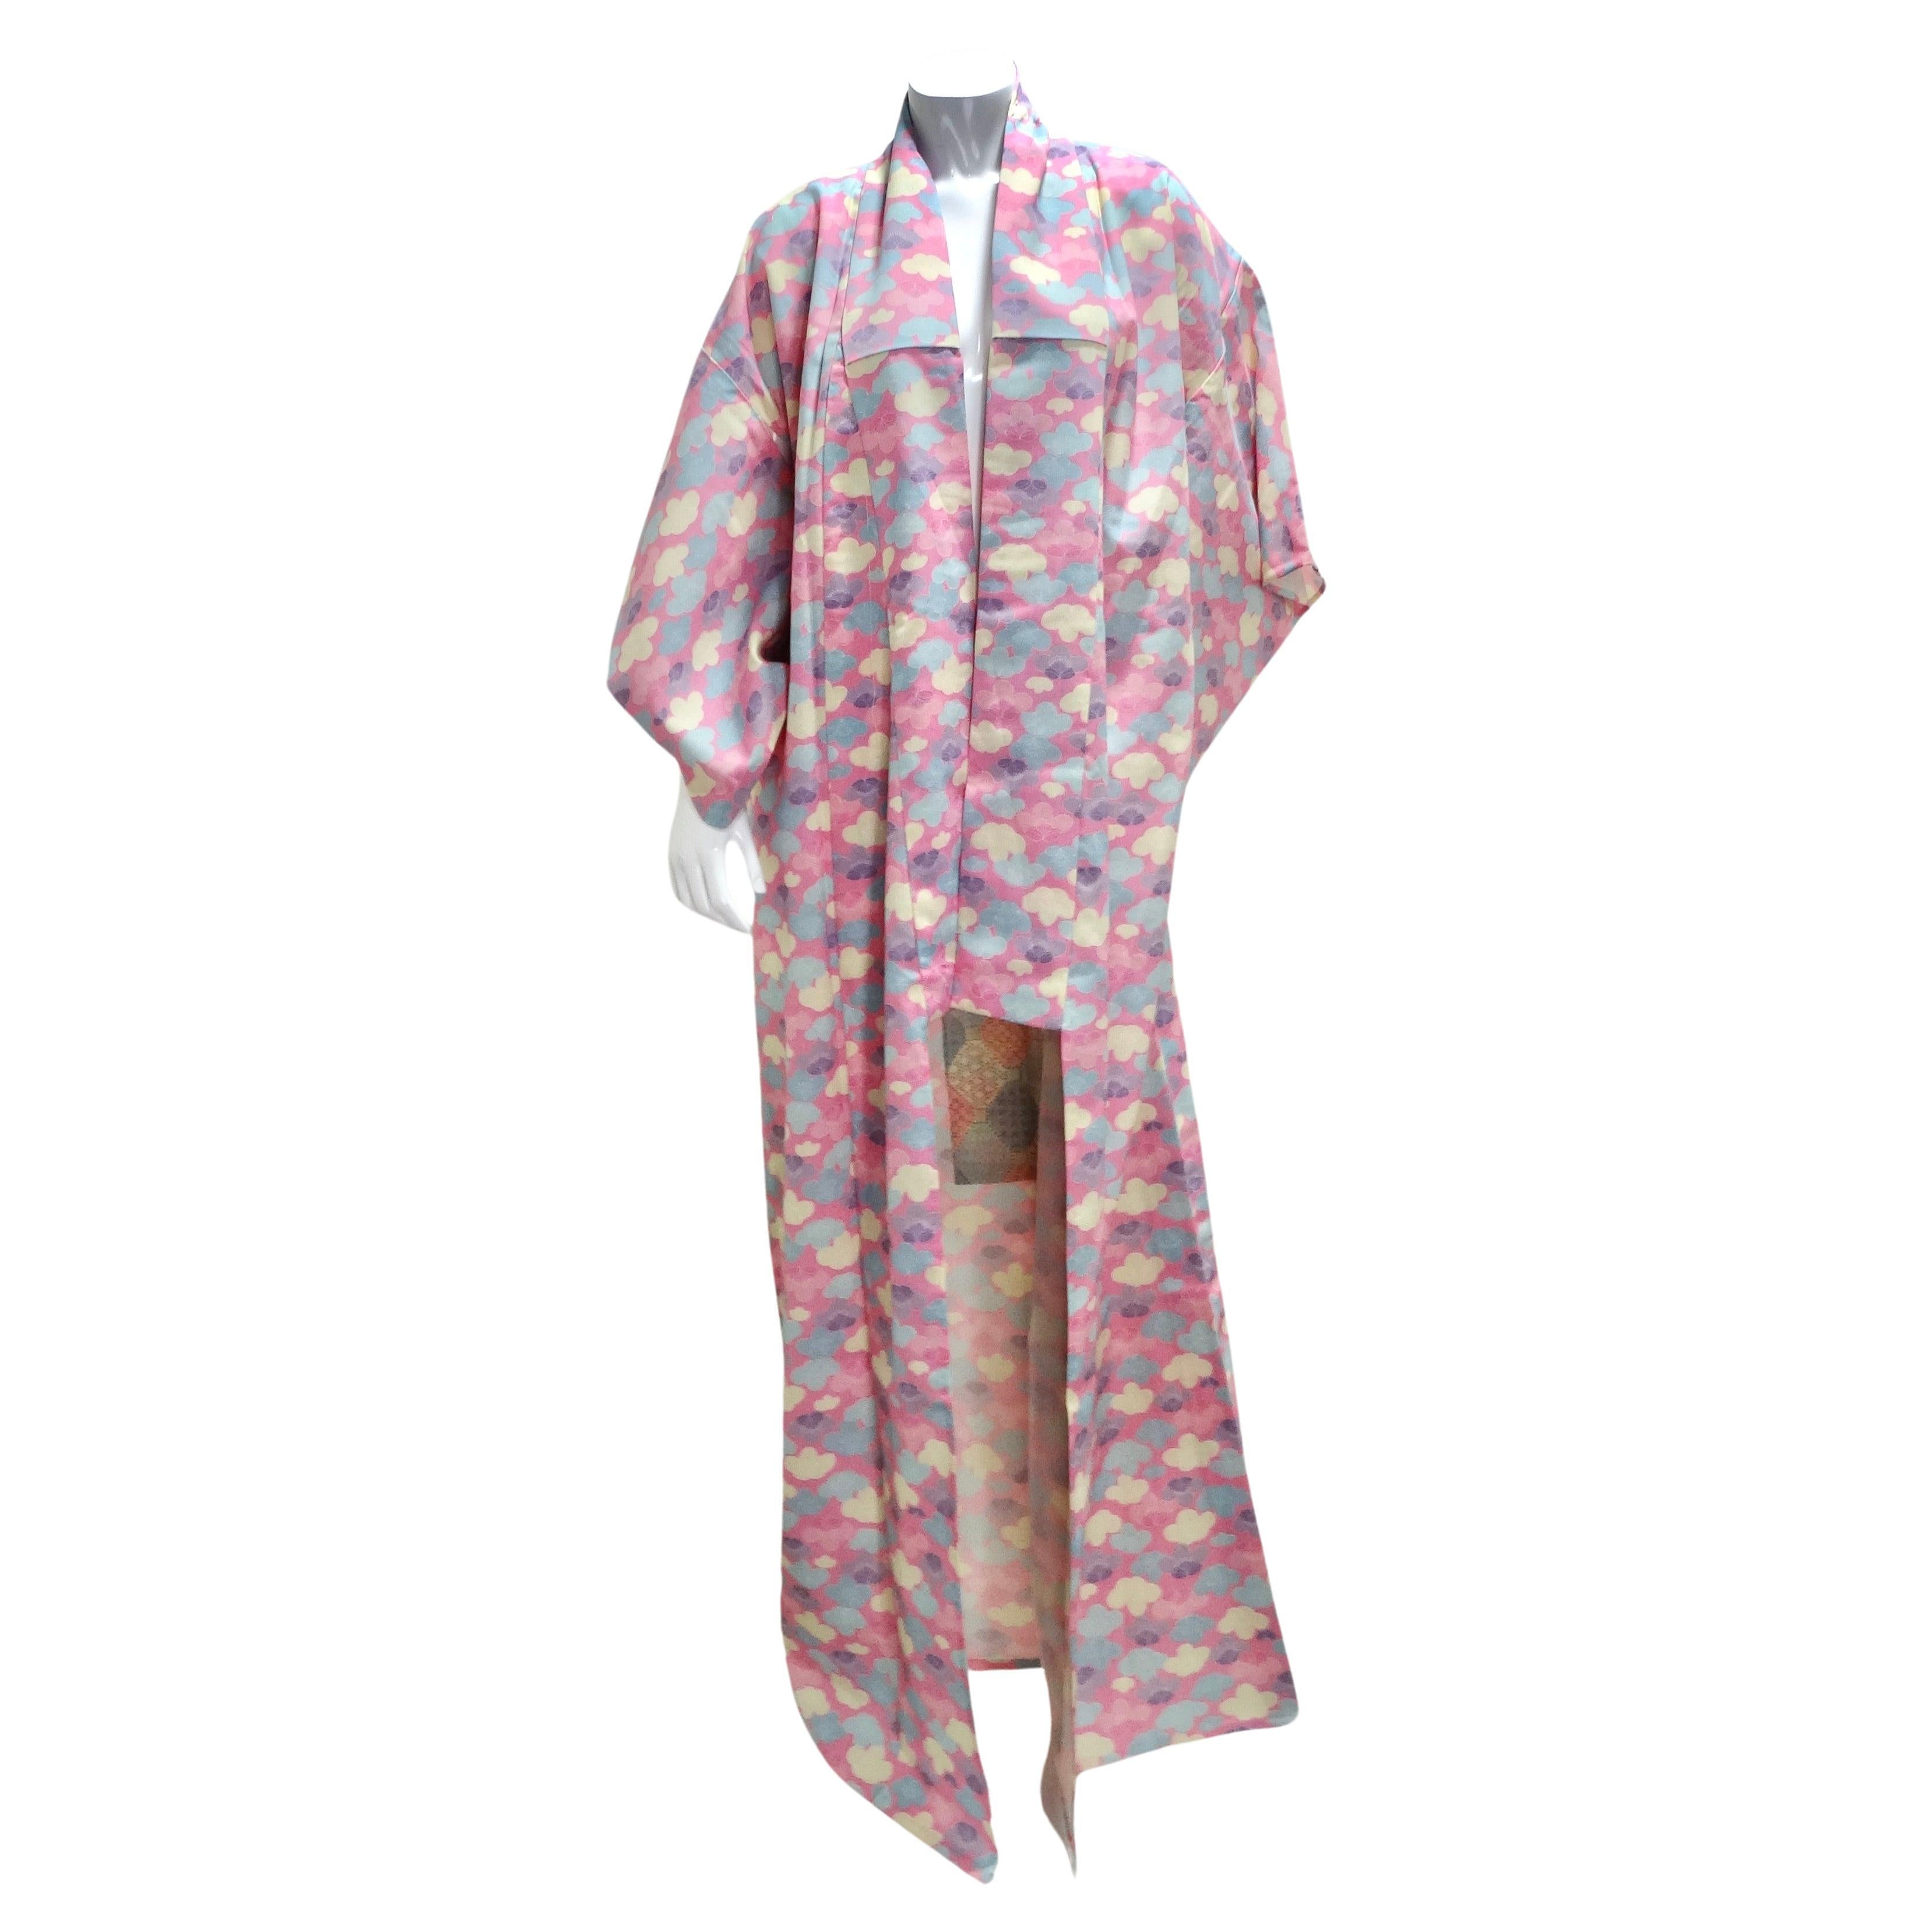 What is a Japanese kimono called?